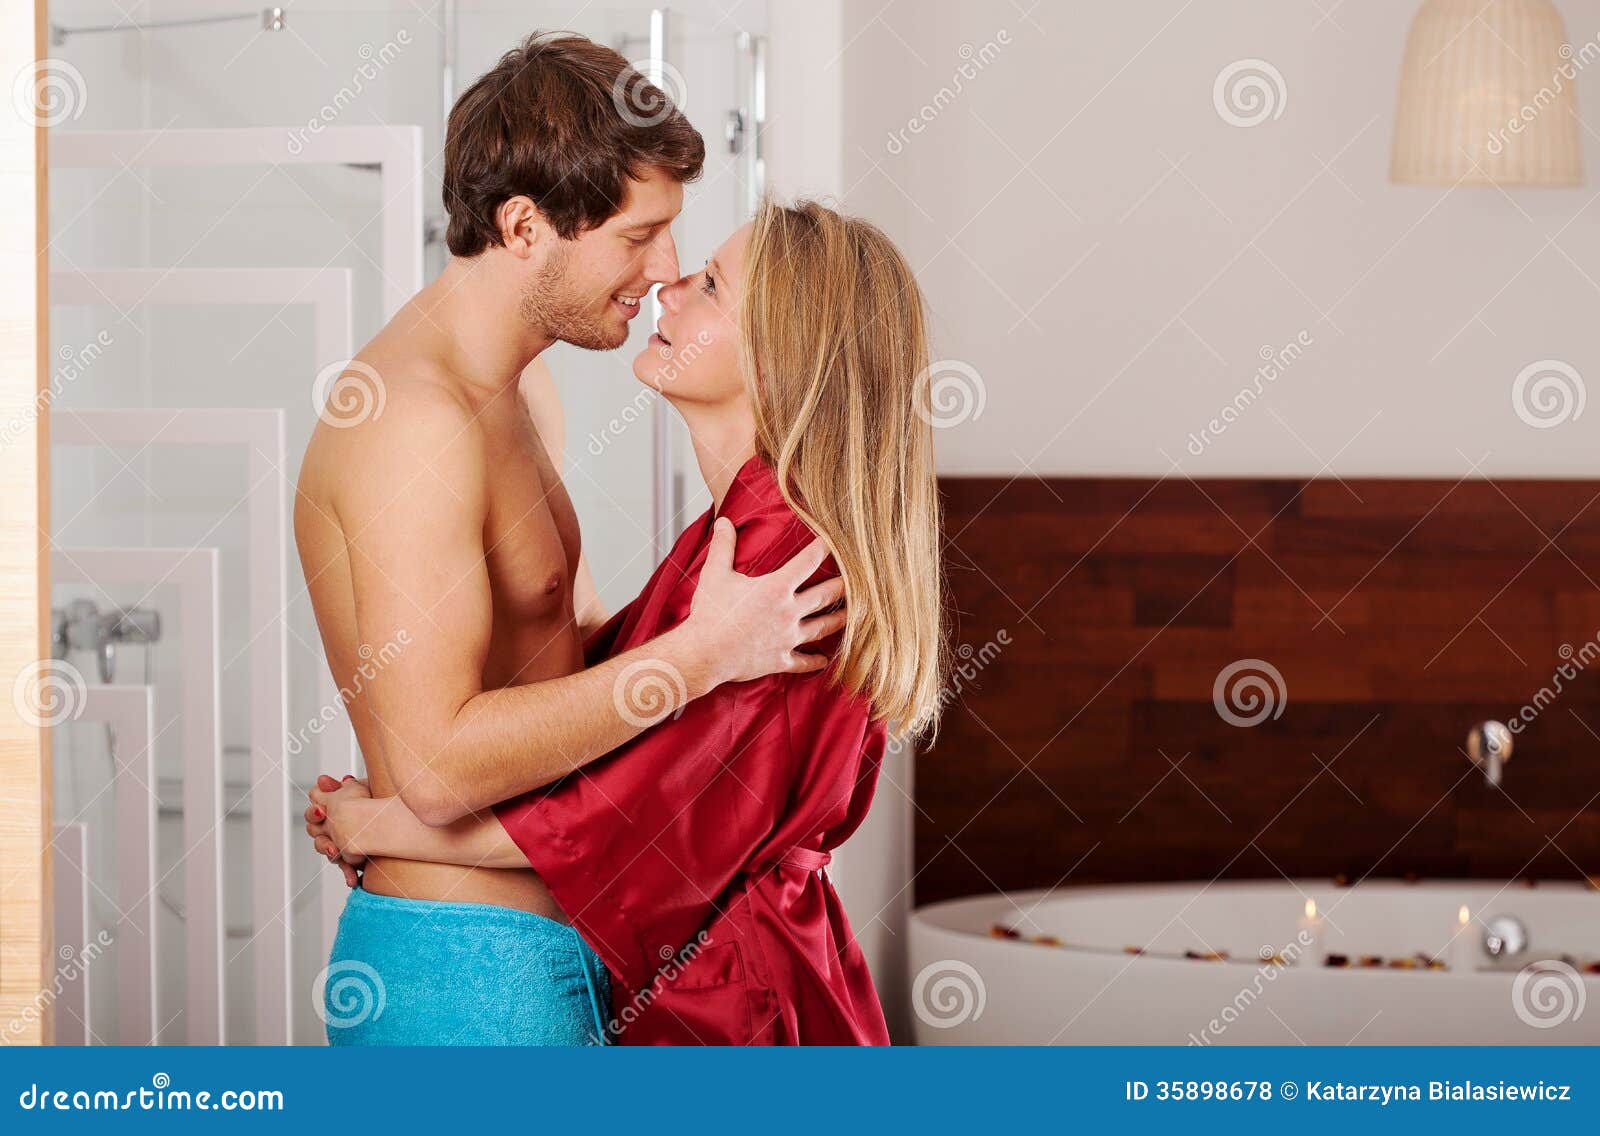 Husband and Wife in the Bathroom Stock Photo pic